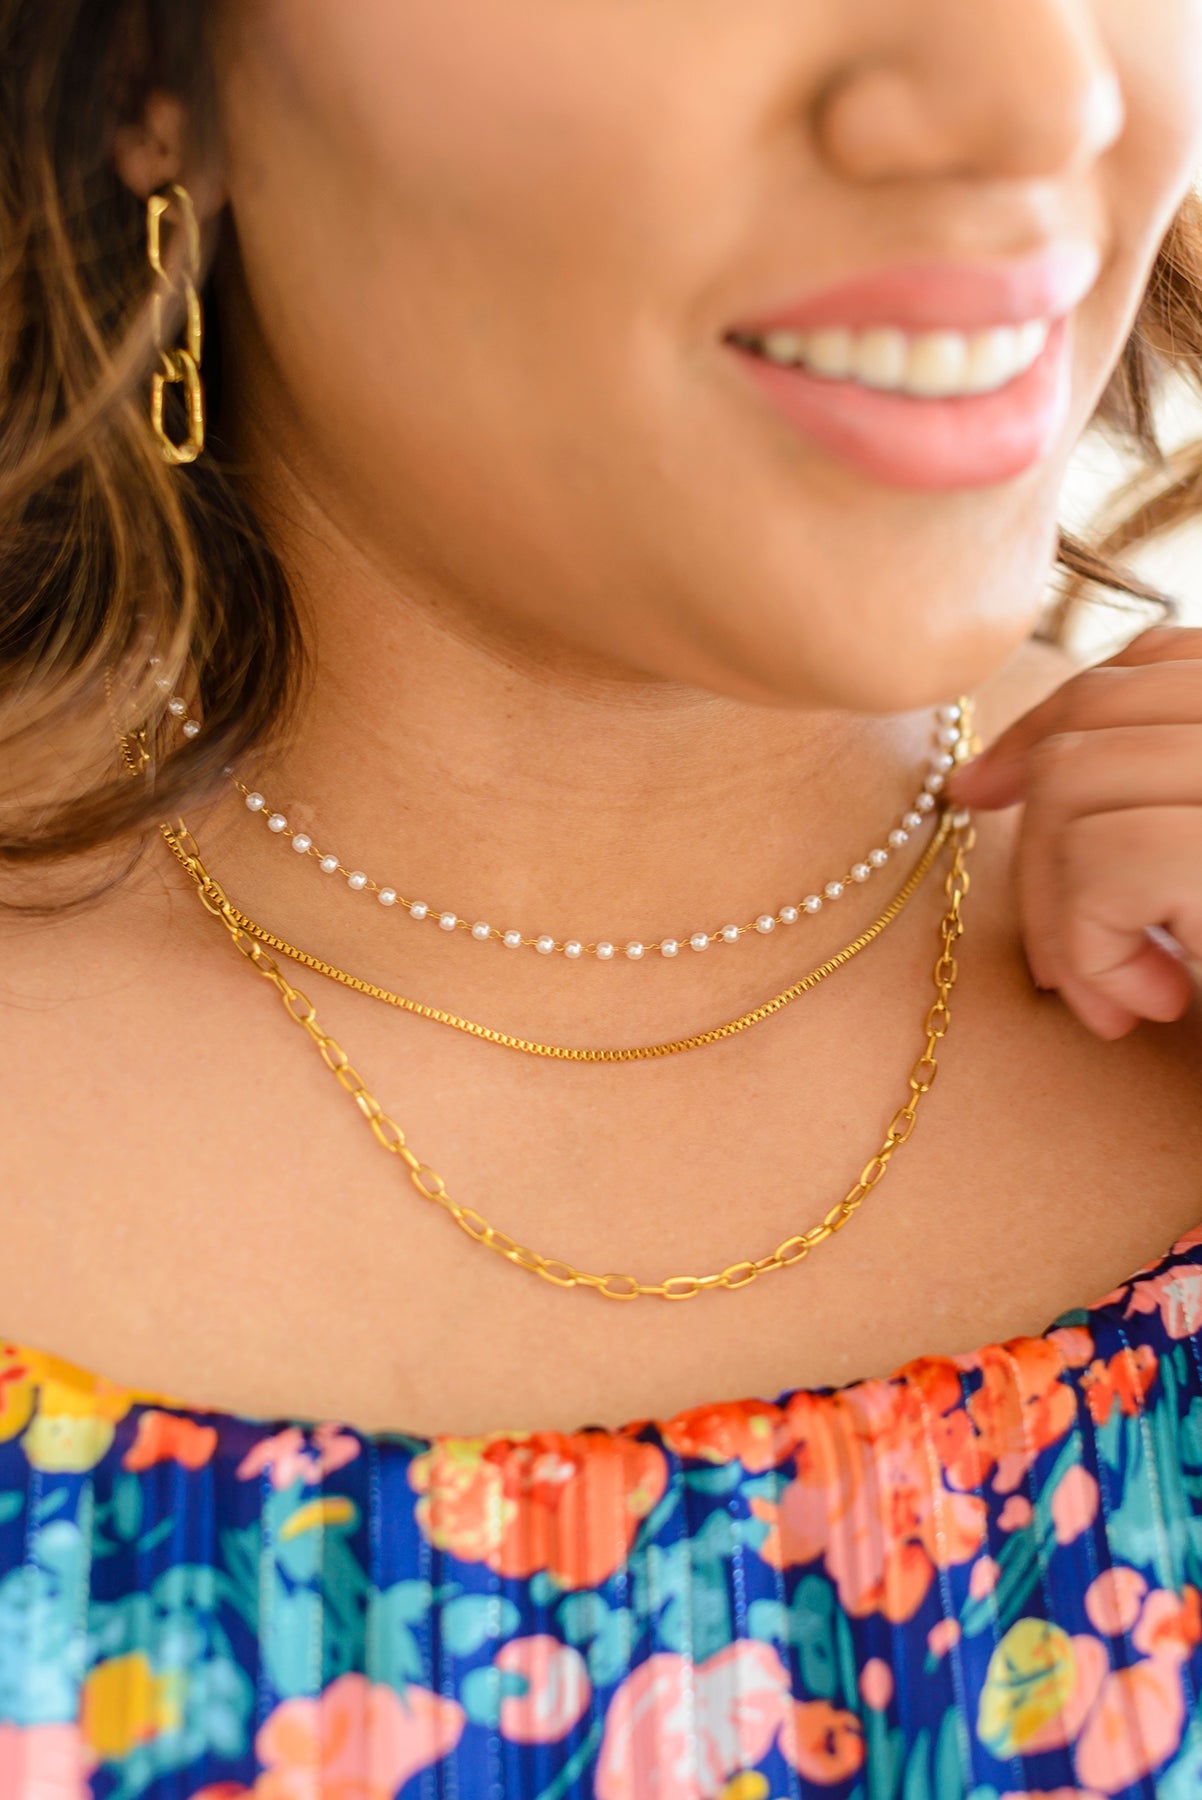 Triple Threat Layered Necklace - 2/20